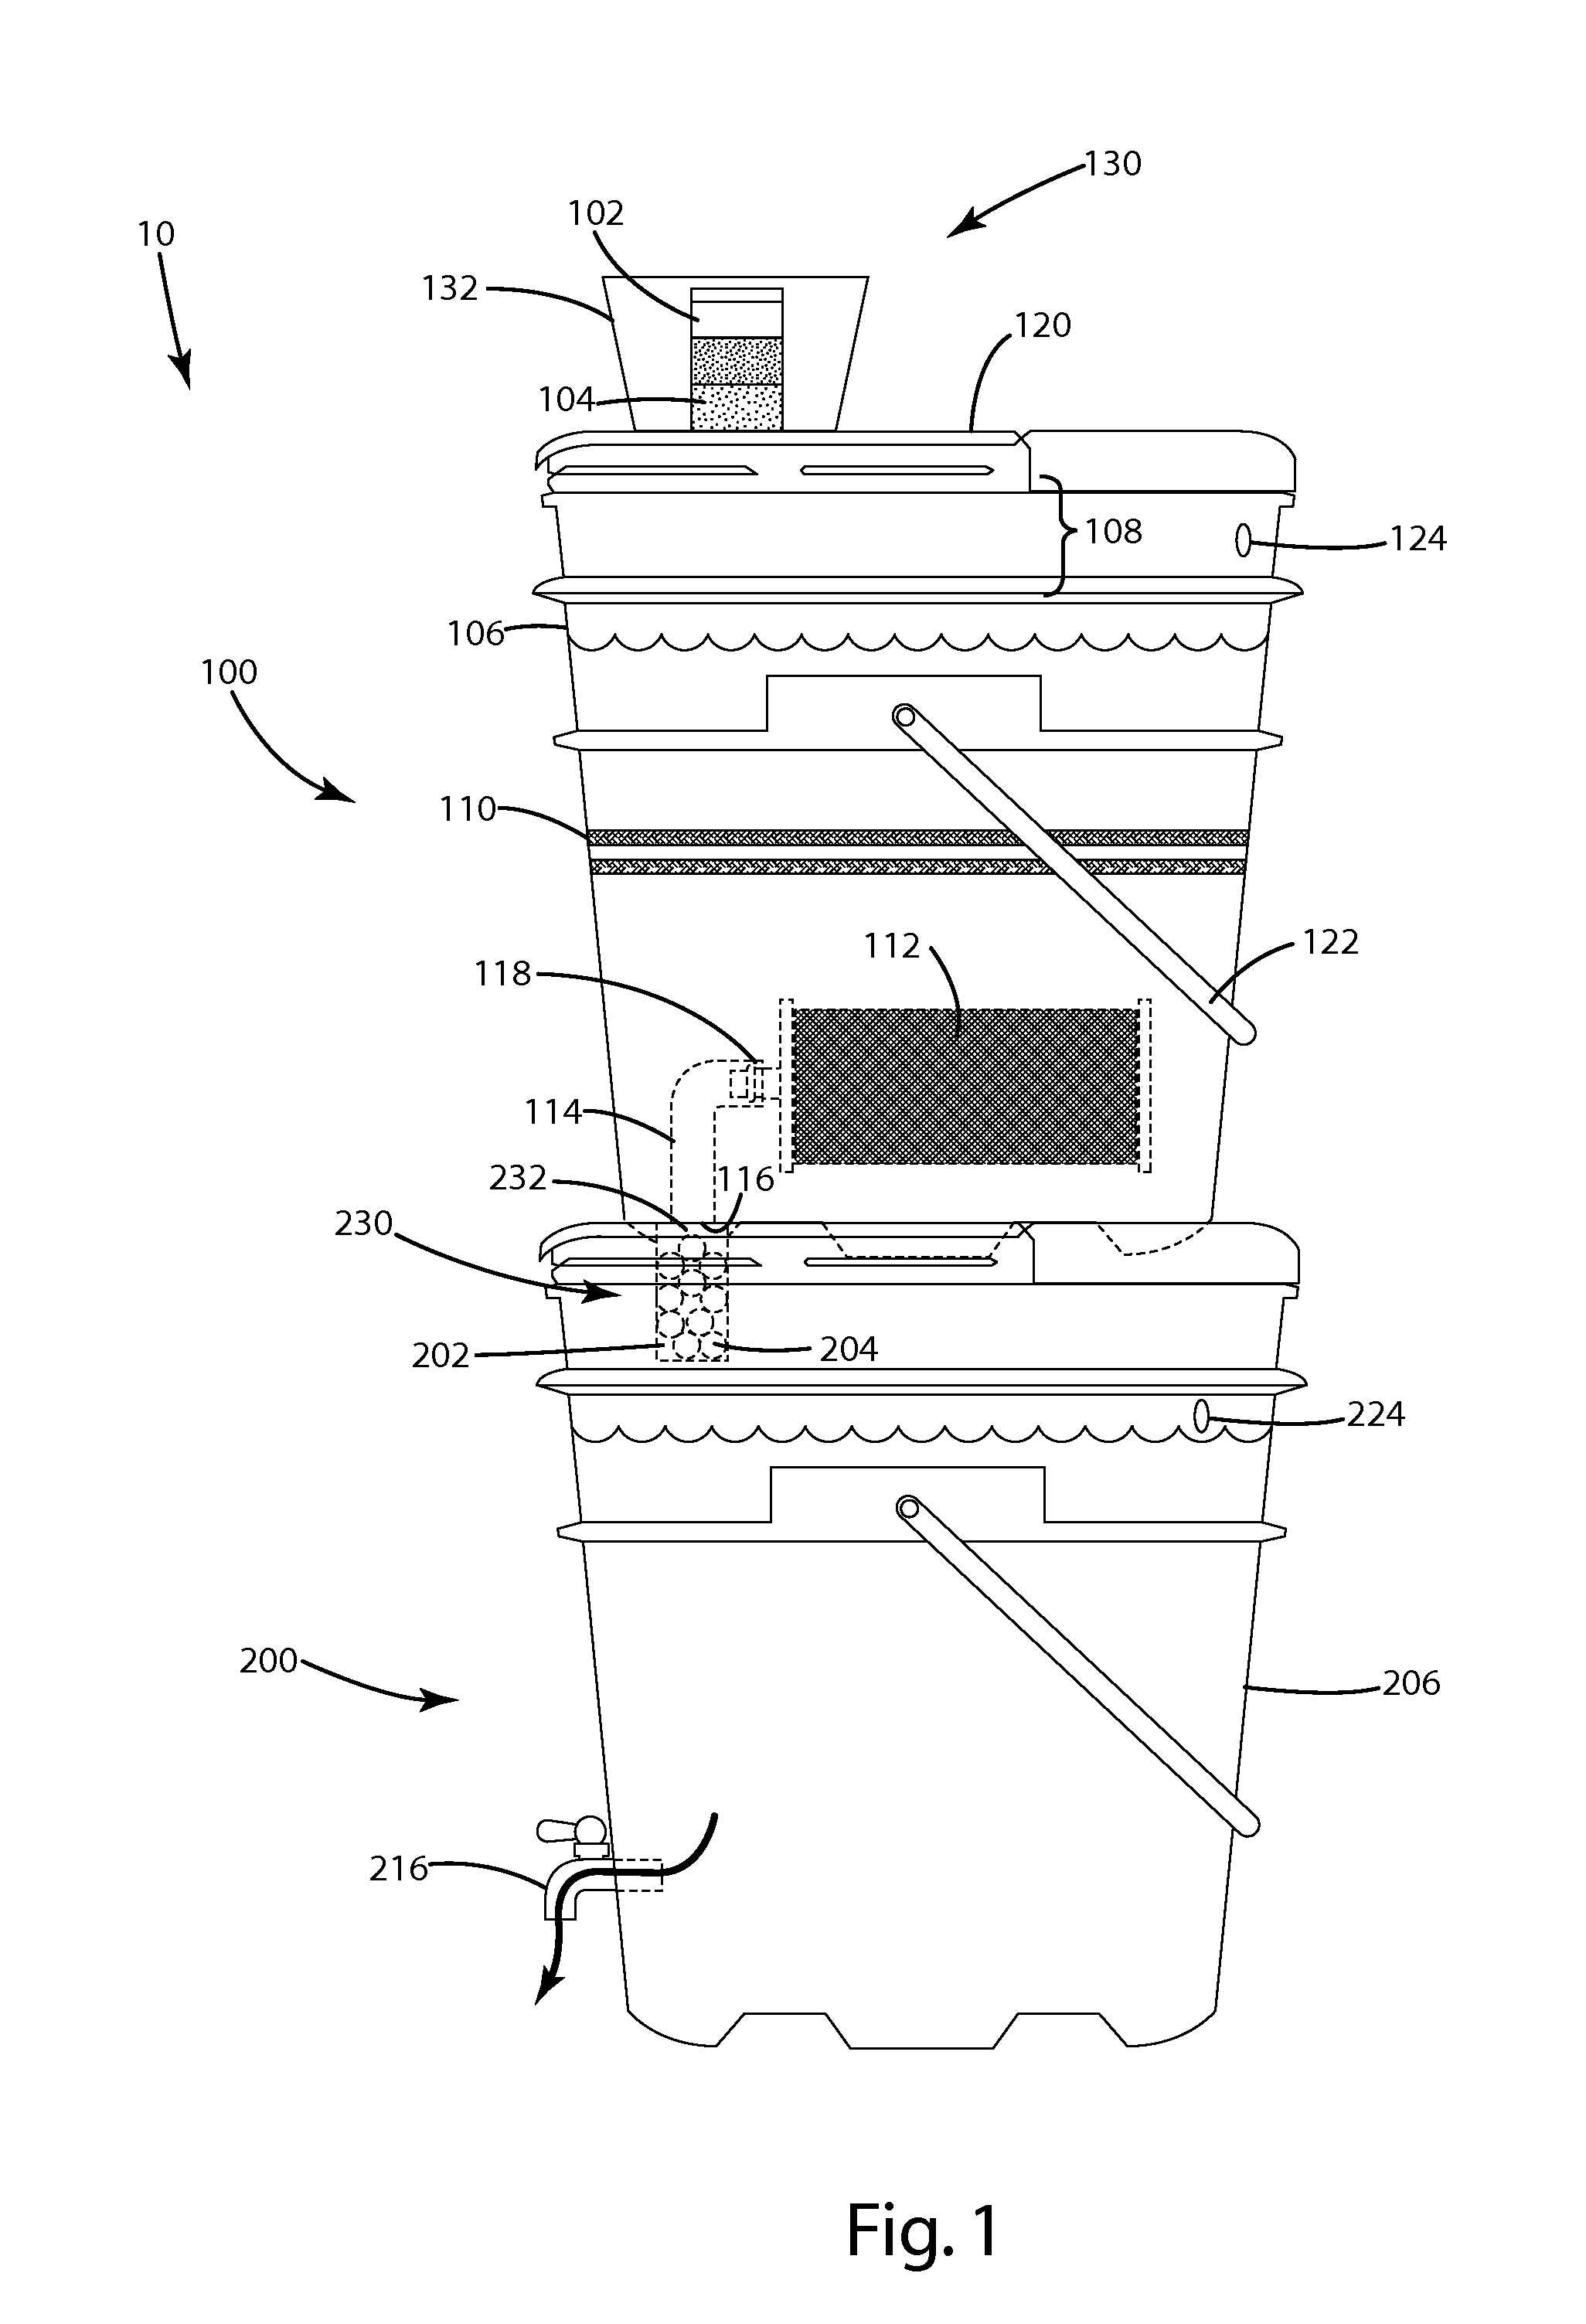 Gravity feed water treatment system with oxidation and disinfection steps